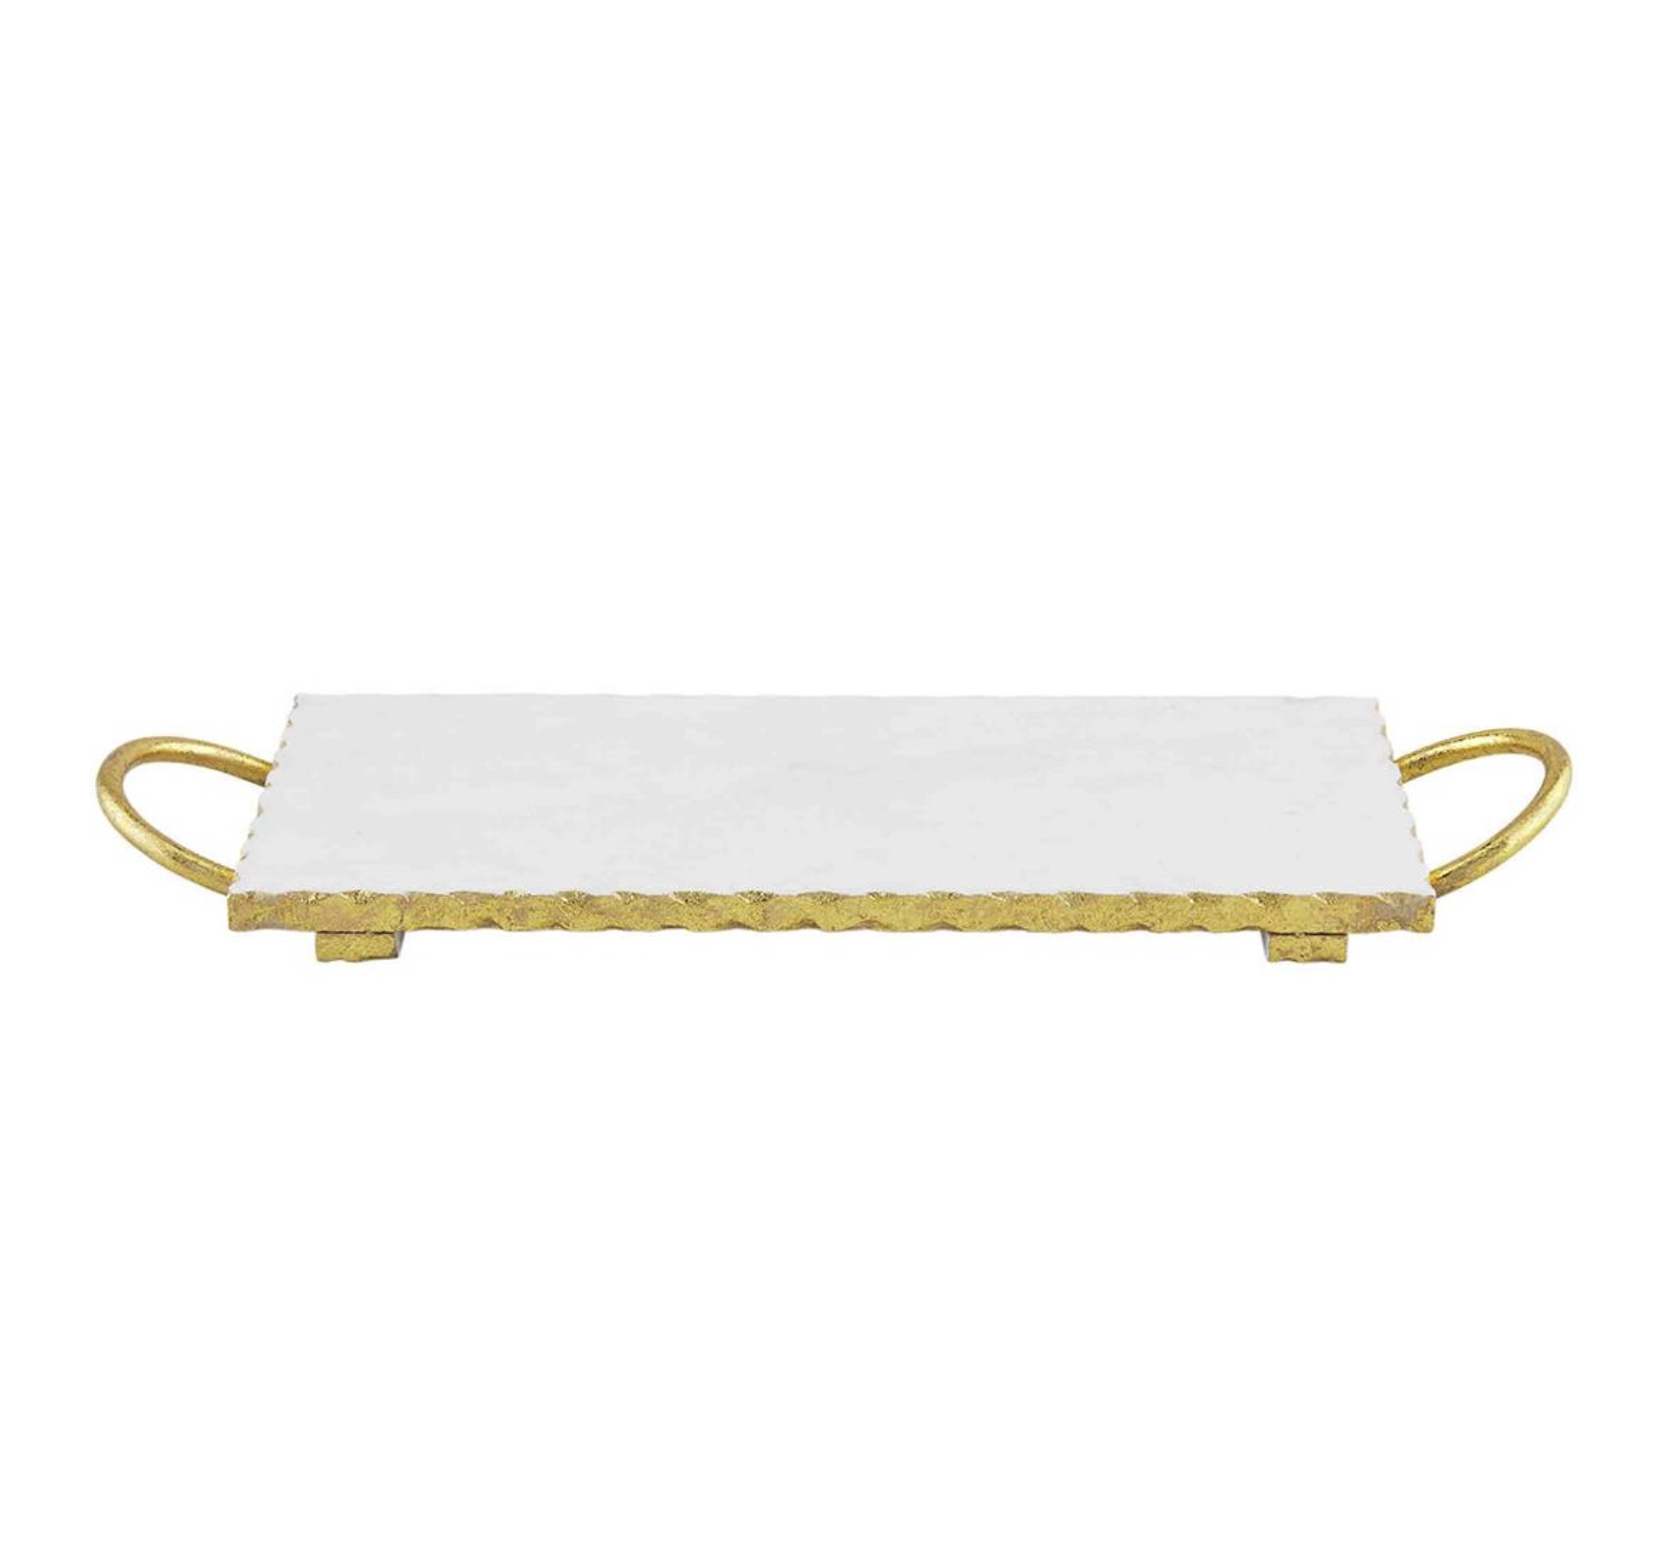 MUD PIE GOLD & MARBLE BOARD WITH HANDLES